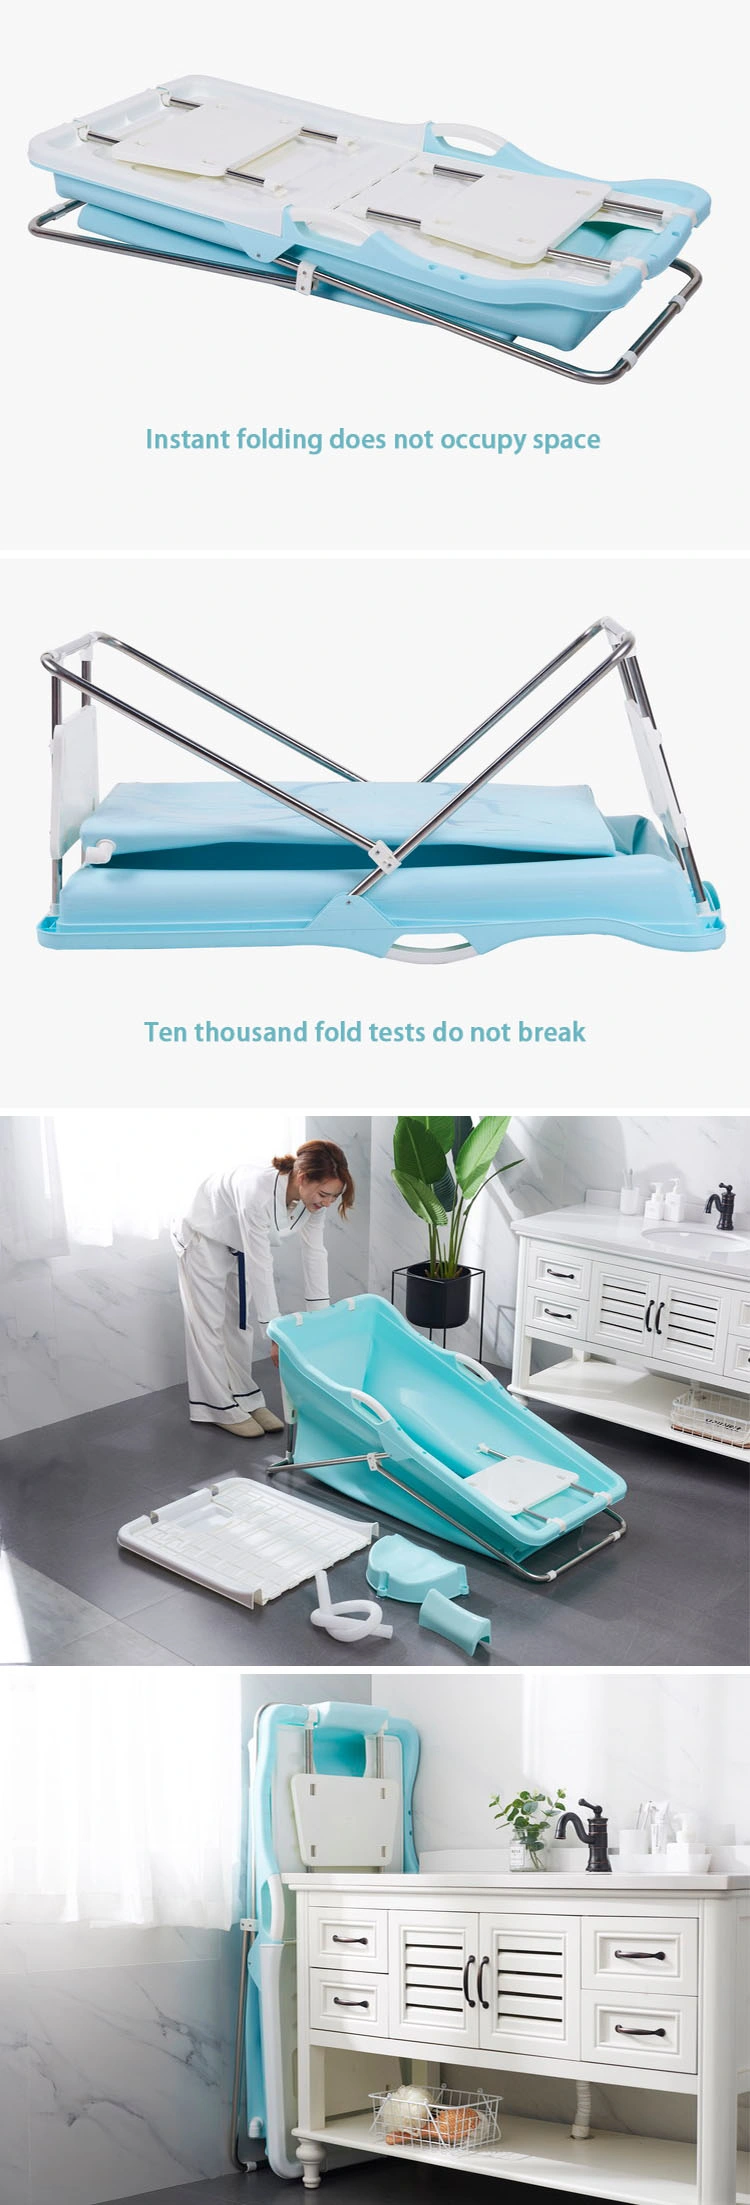 2020 SGS Test Passed Cheap Baby Foldable Plasticbathtub, Newest Type PP5 Chinese Portable Baby Foldable Badbalance